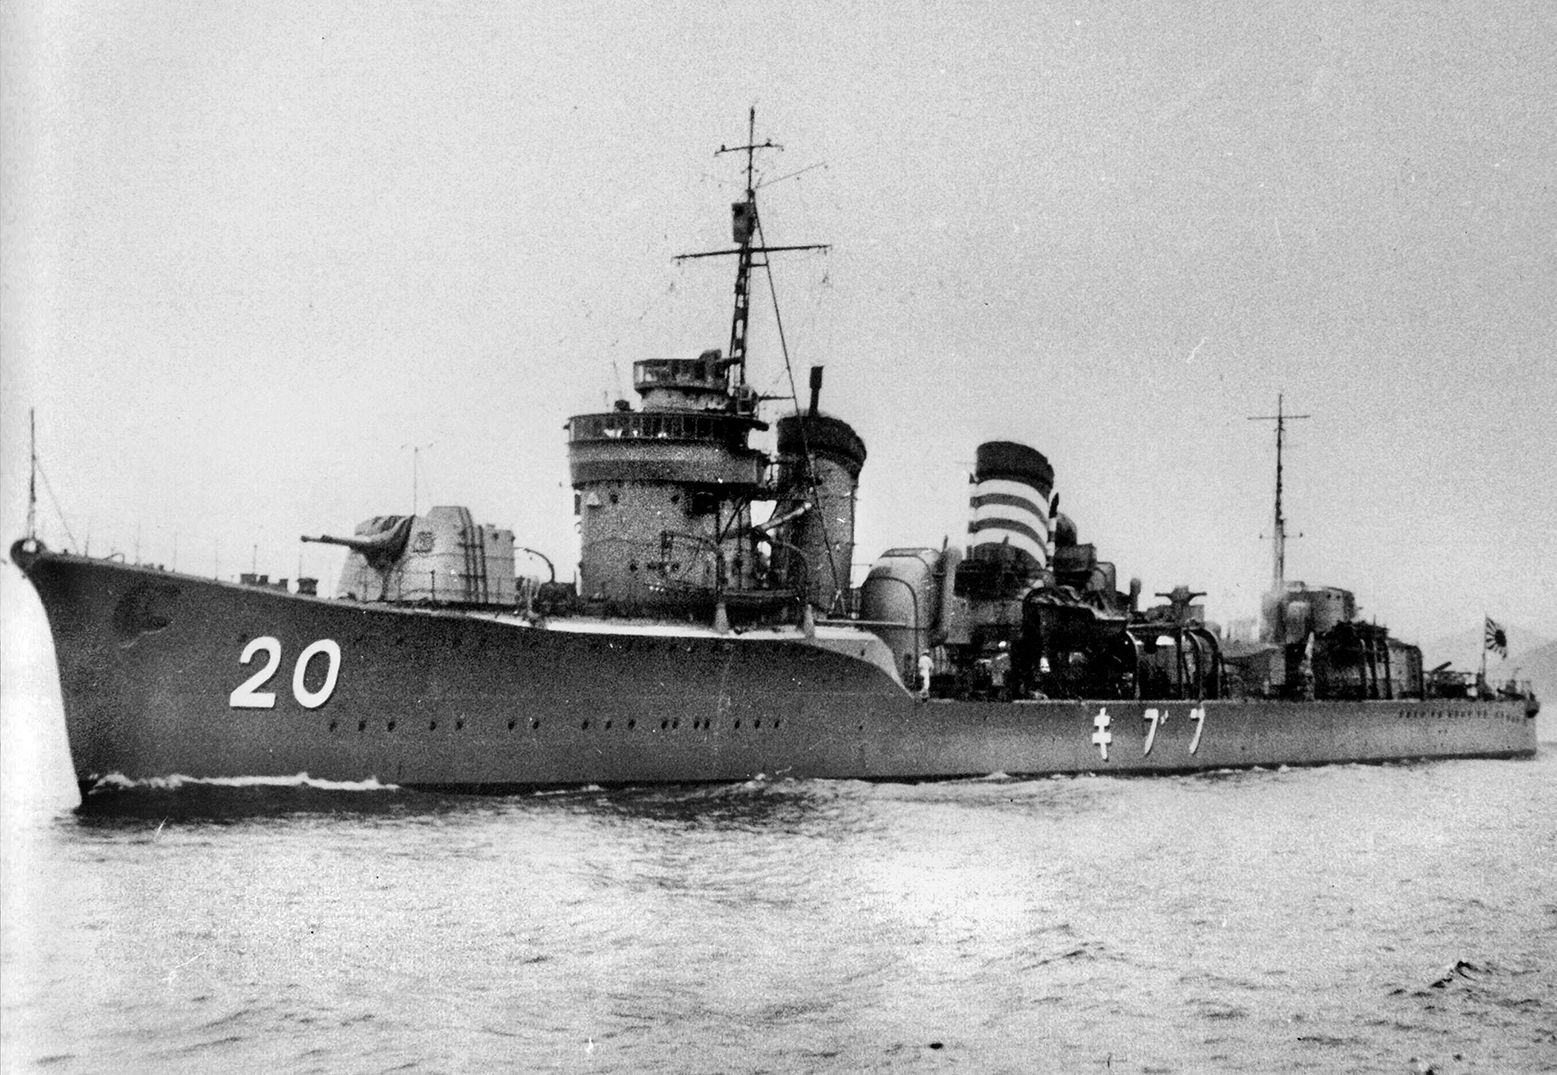 The Japanese destroyer Fubuki participated in the Battle of Sunda Strait, demonstrating Japanese naval prowess in the use of torpedoes. Fubuki was sunk at Cape Esperance in 1943.